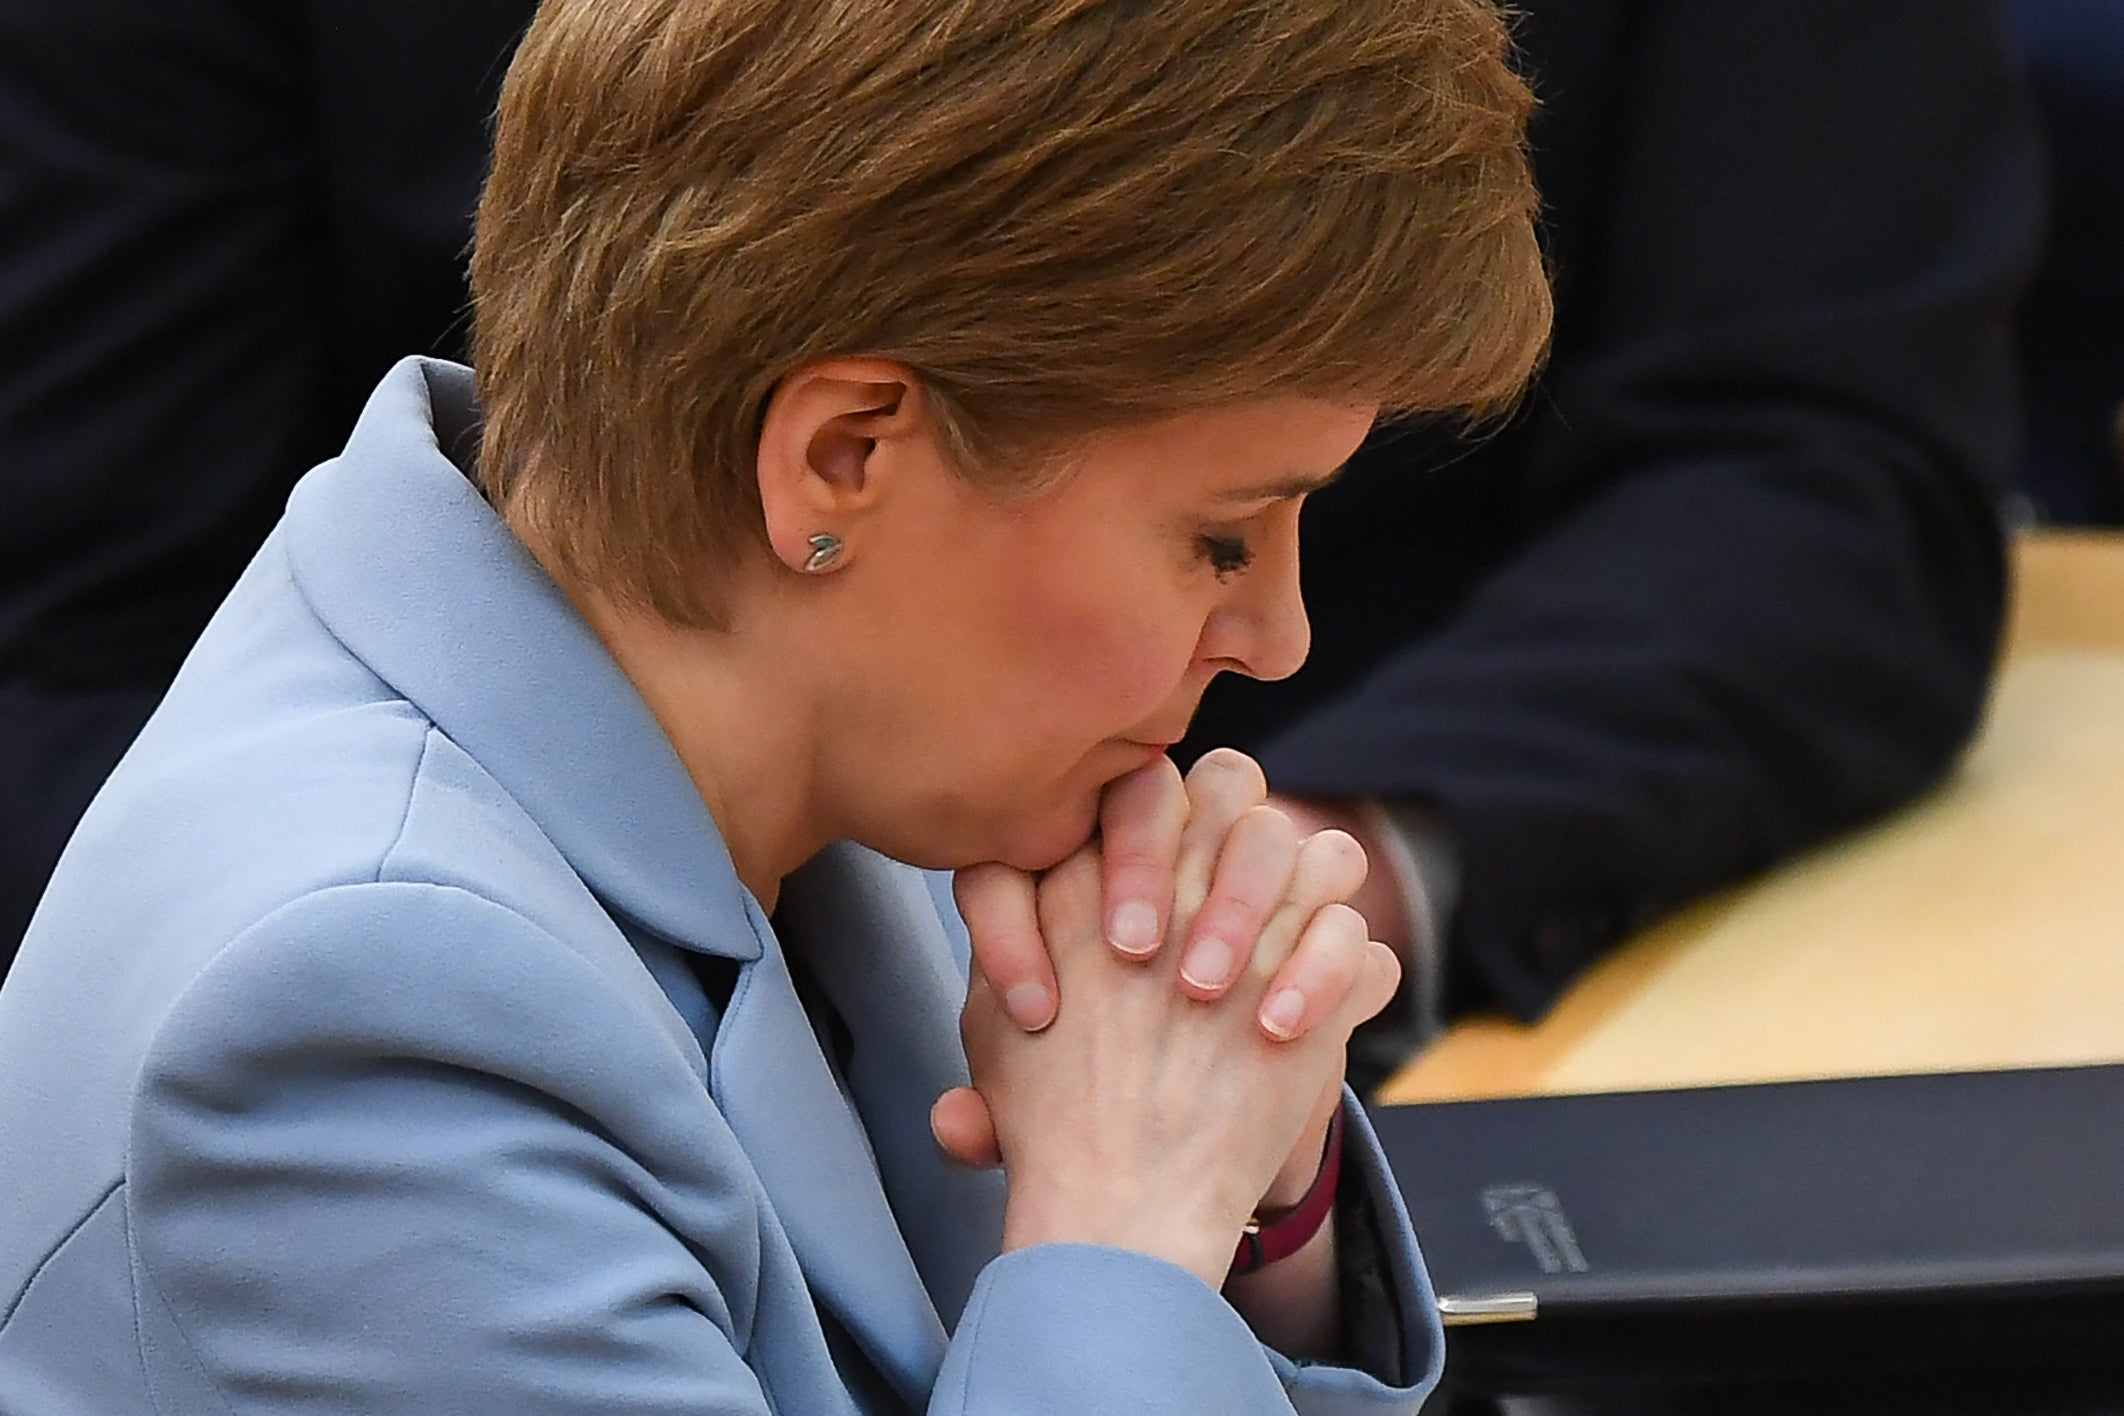 Nicola Sturgeon pauses after giving her statement on independence referendum at the Scottish Parliament in Edinburgh on Tuesday